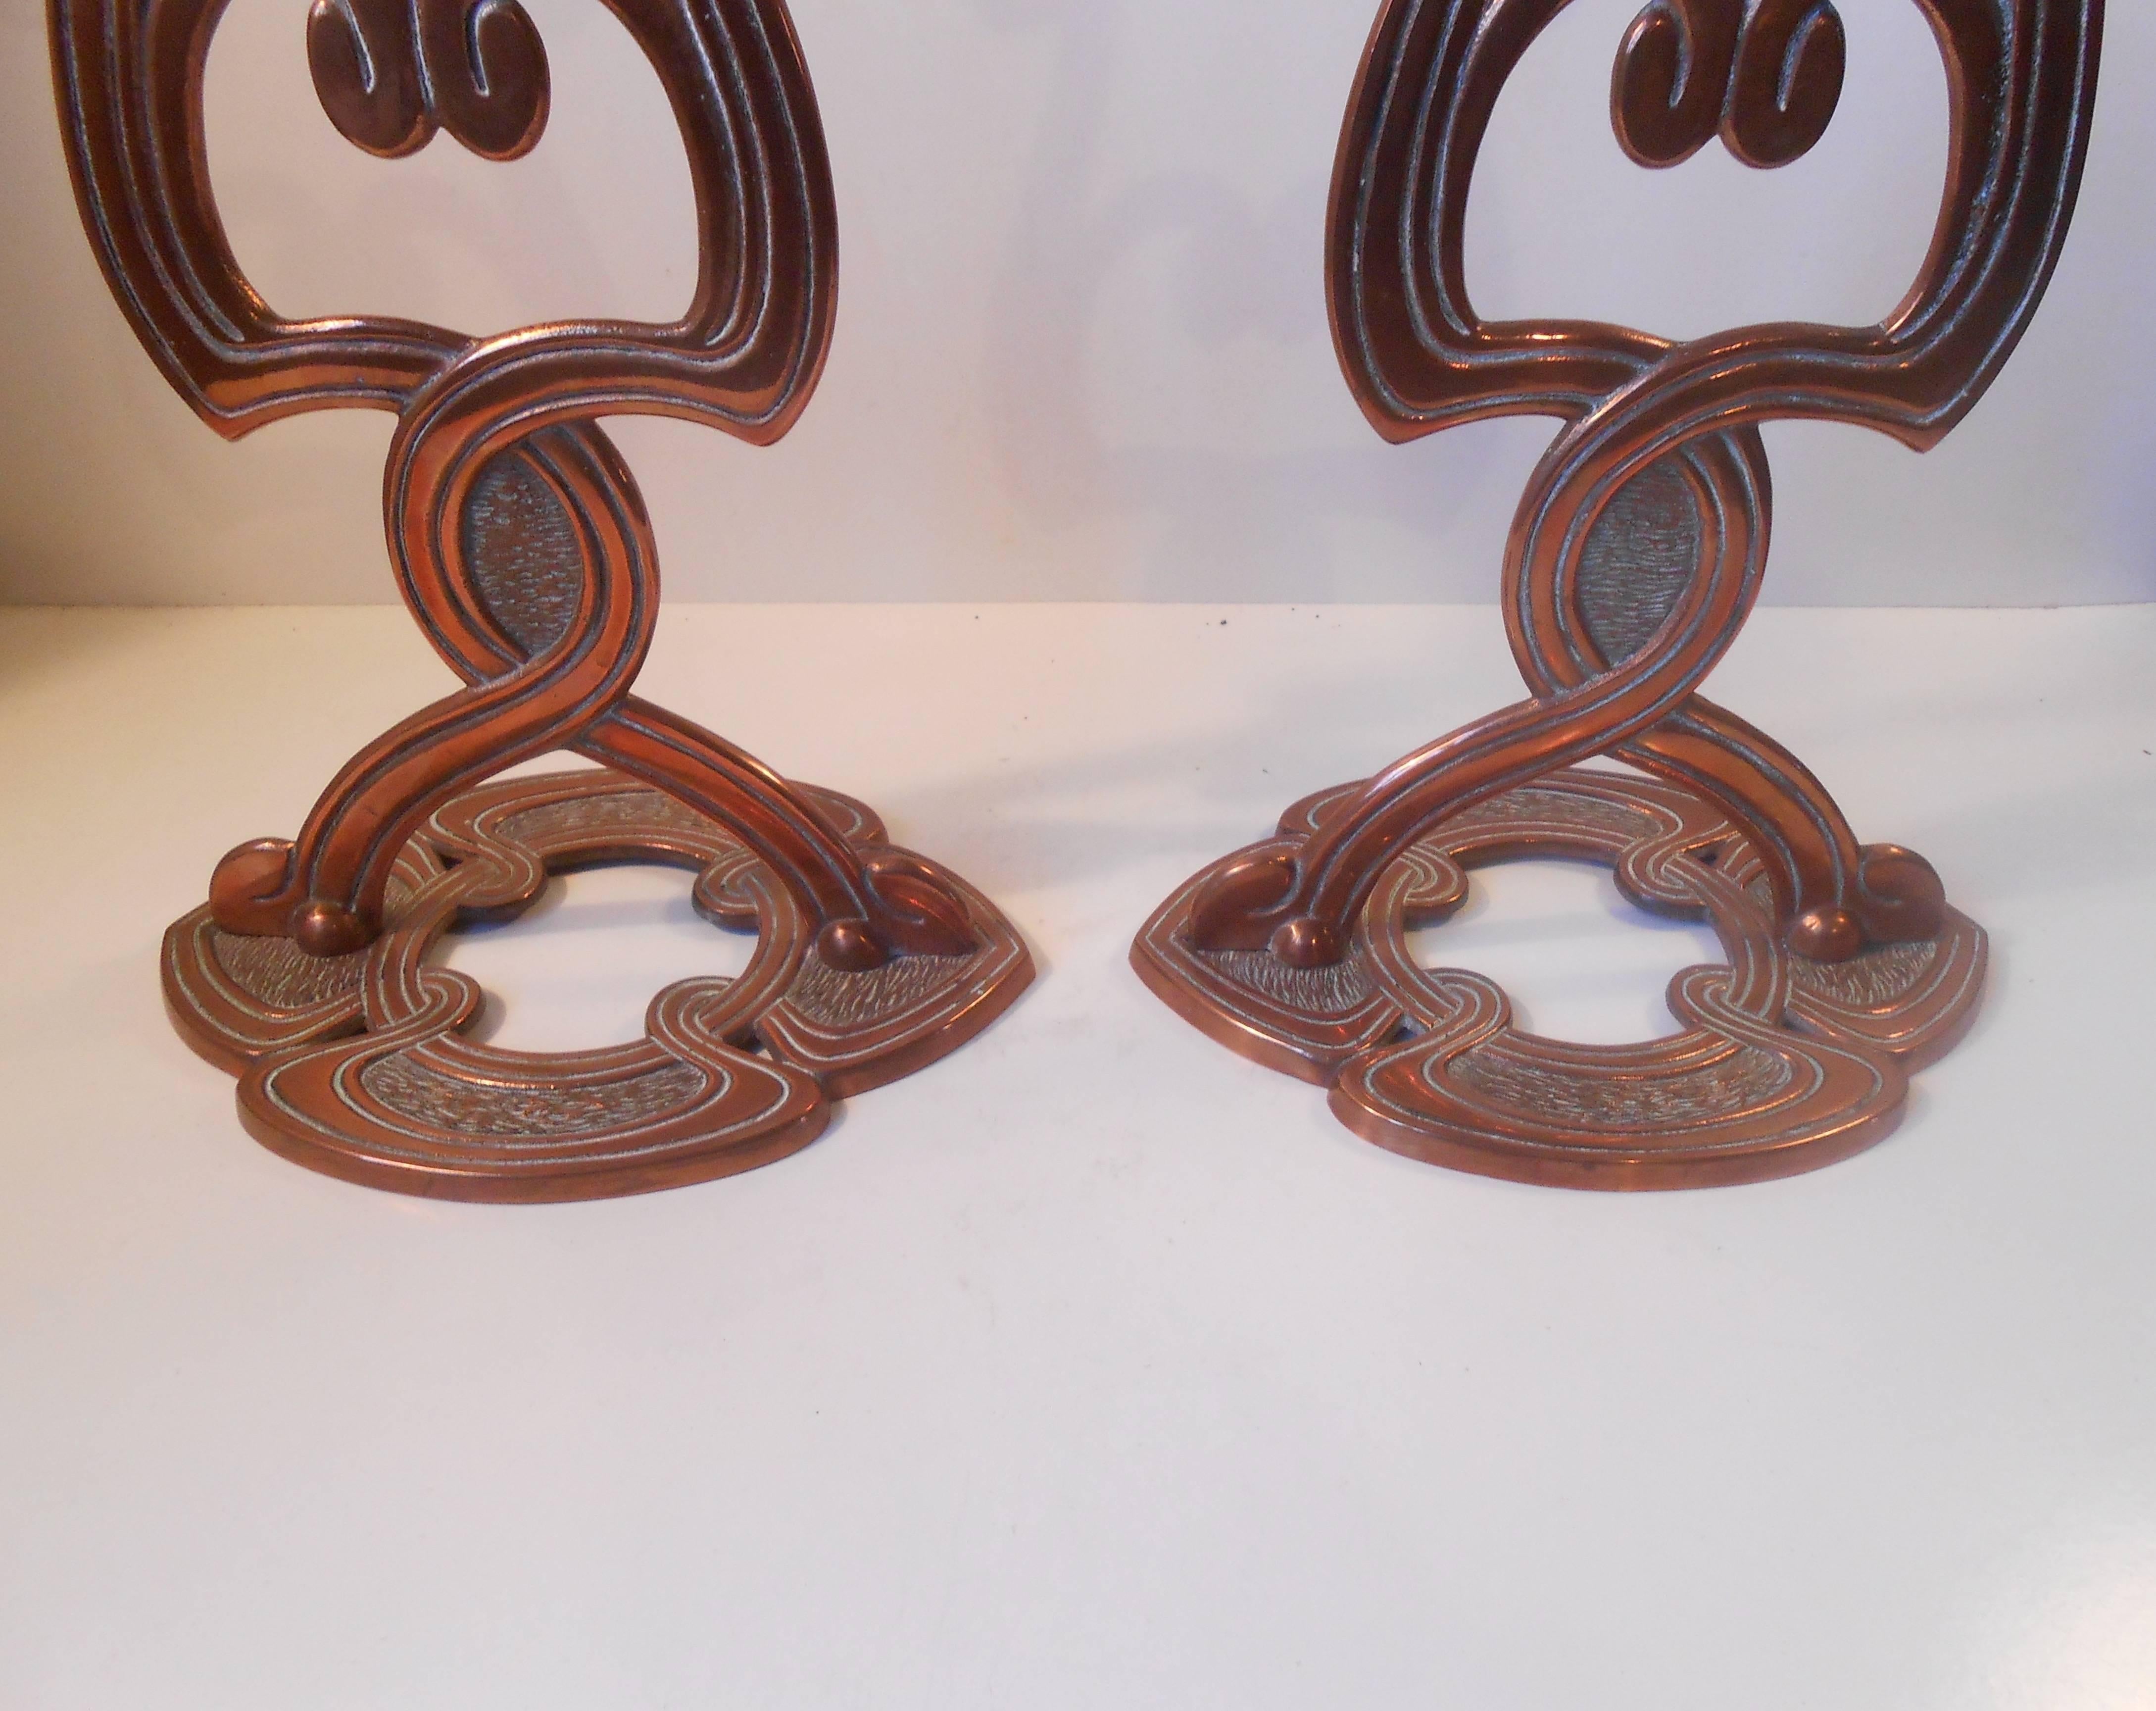 19th Century Danish Jugend Copper Candelabras In Good Condition For Sale In Esbjerg, DK